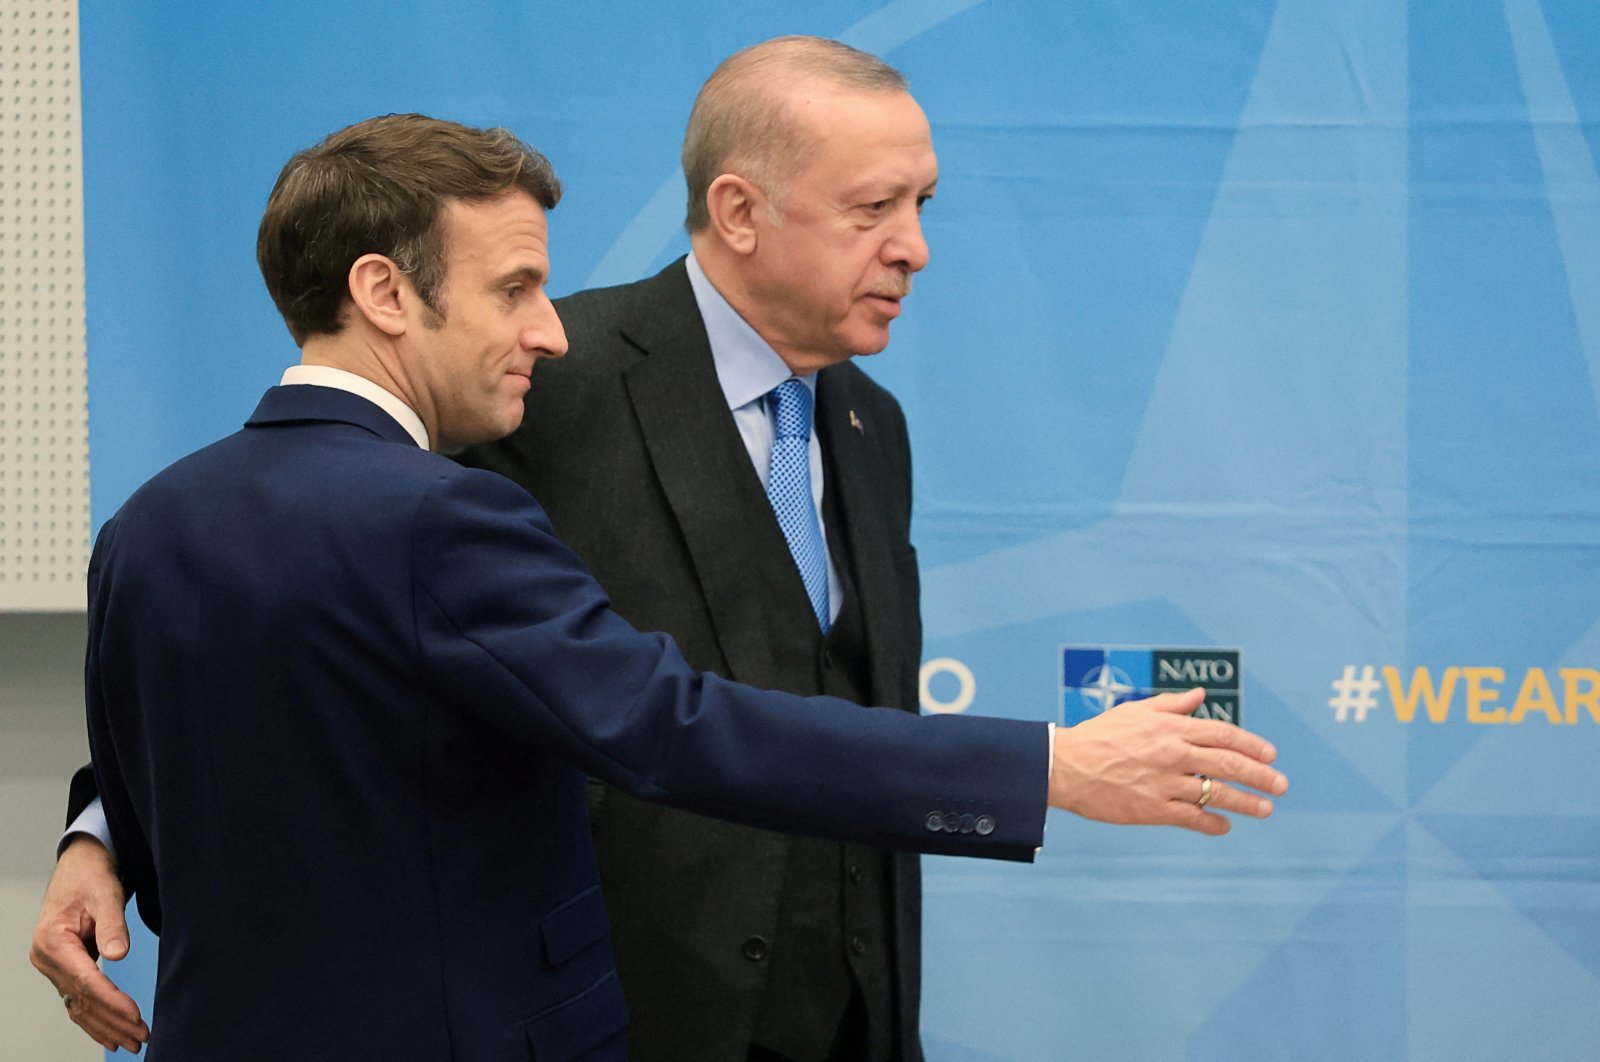 French President Emmanuel Macron (L) and President Recep Tayyip Erdoğan attend a bilateral meeting ahead of a NATO summit to discuss Russia&#039;s invasion of Ukraine, at the alliance&#039;s headquarters in Brussels, Belgium, March 24, 2022. (Reuters Photo)